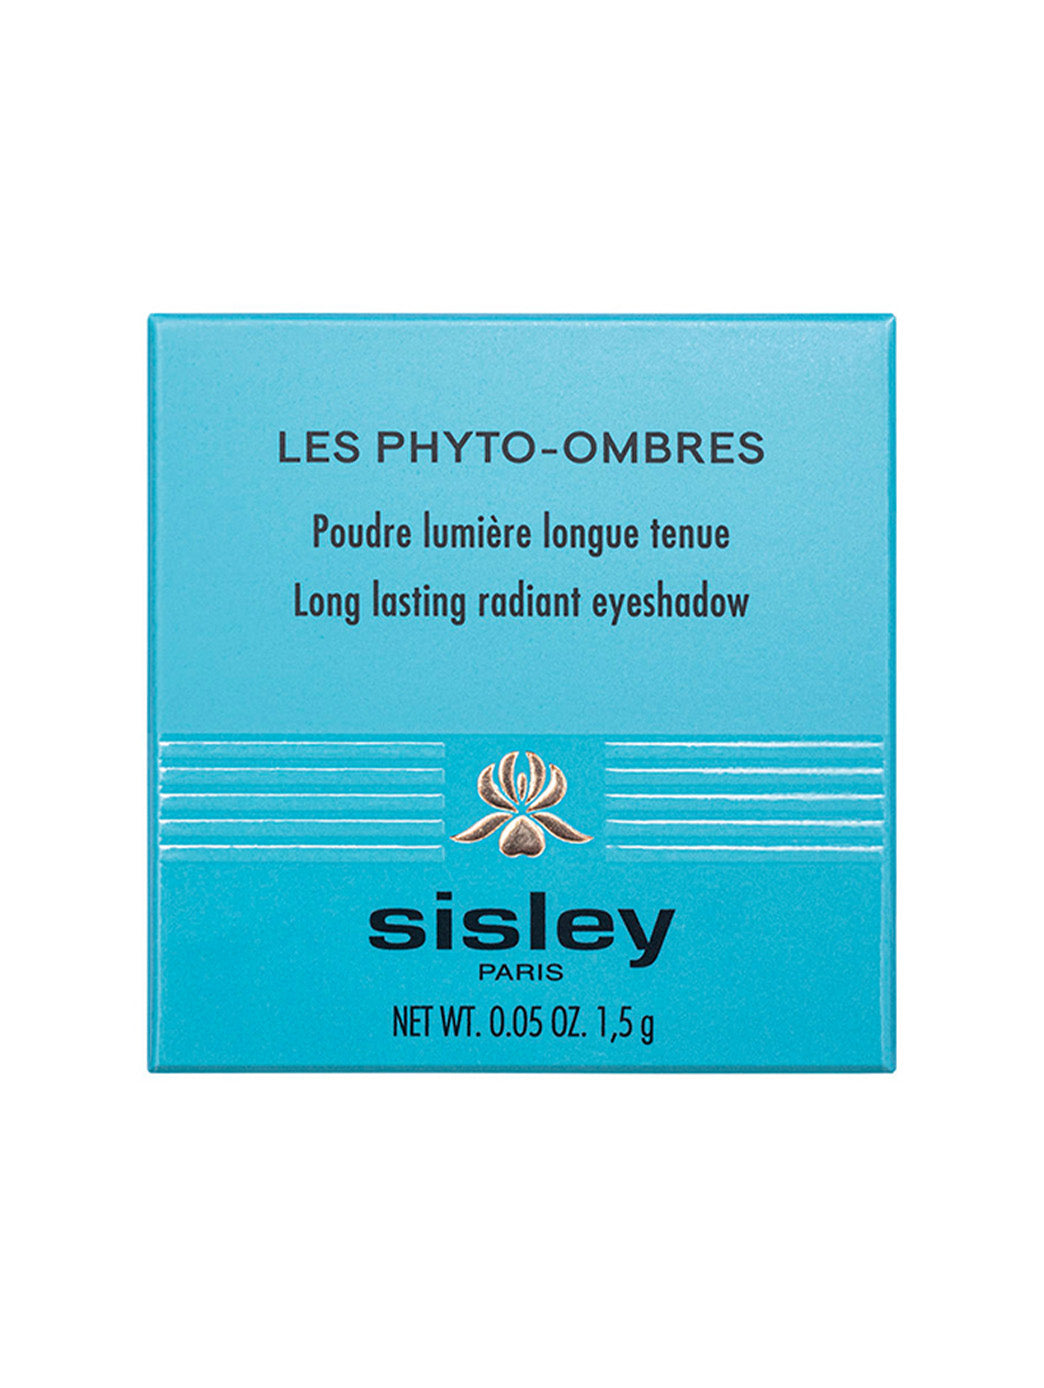 42472956952726 - Les Phyto-Ombres